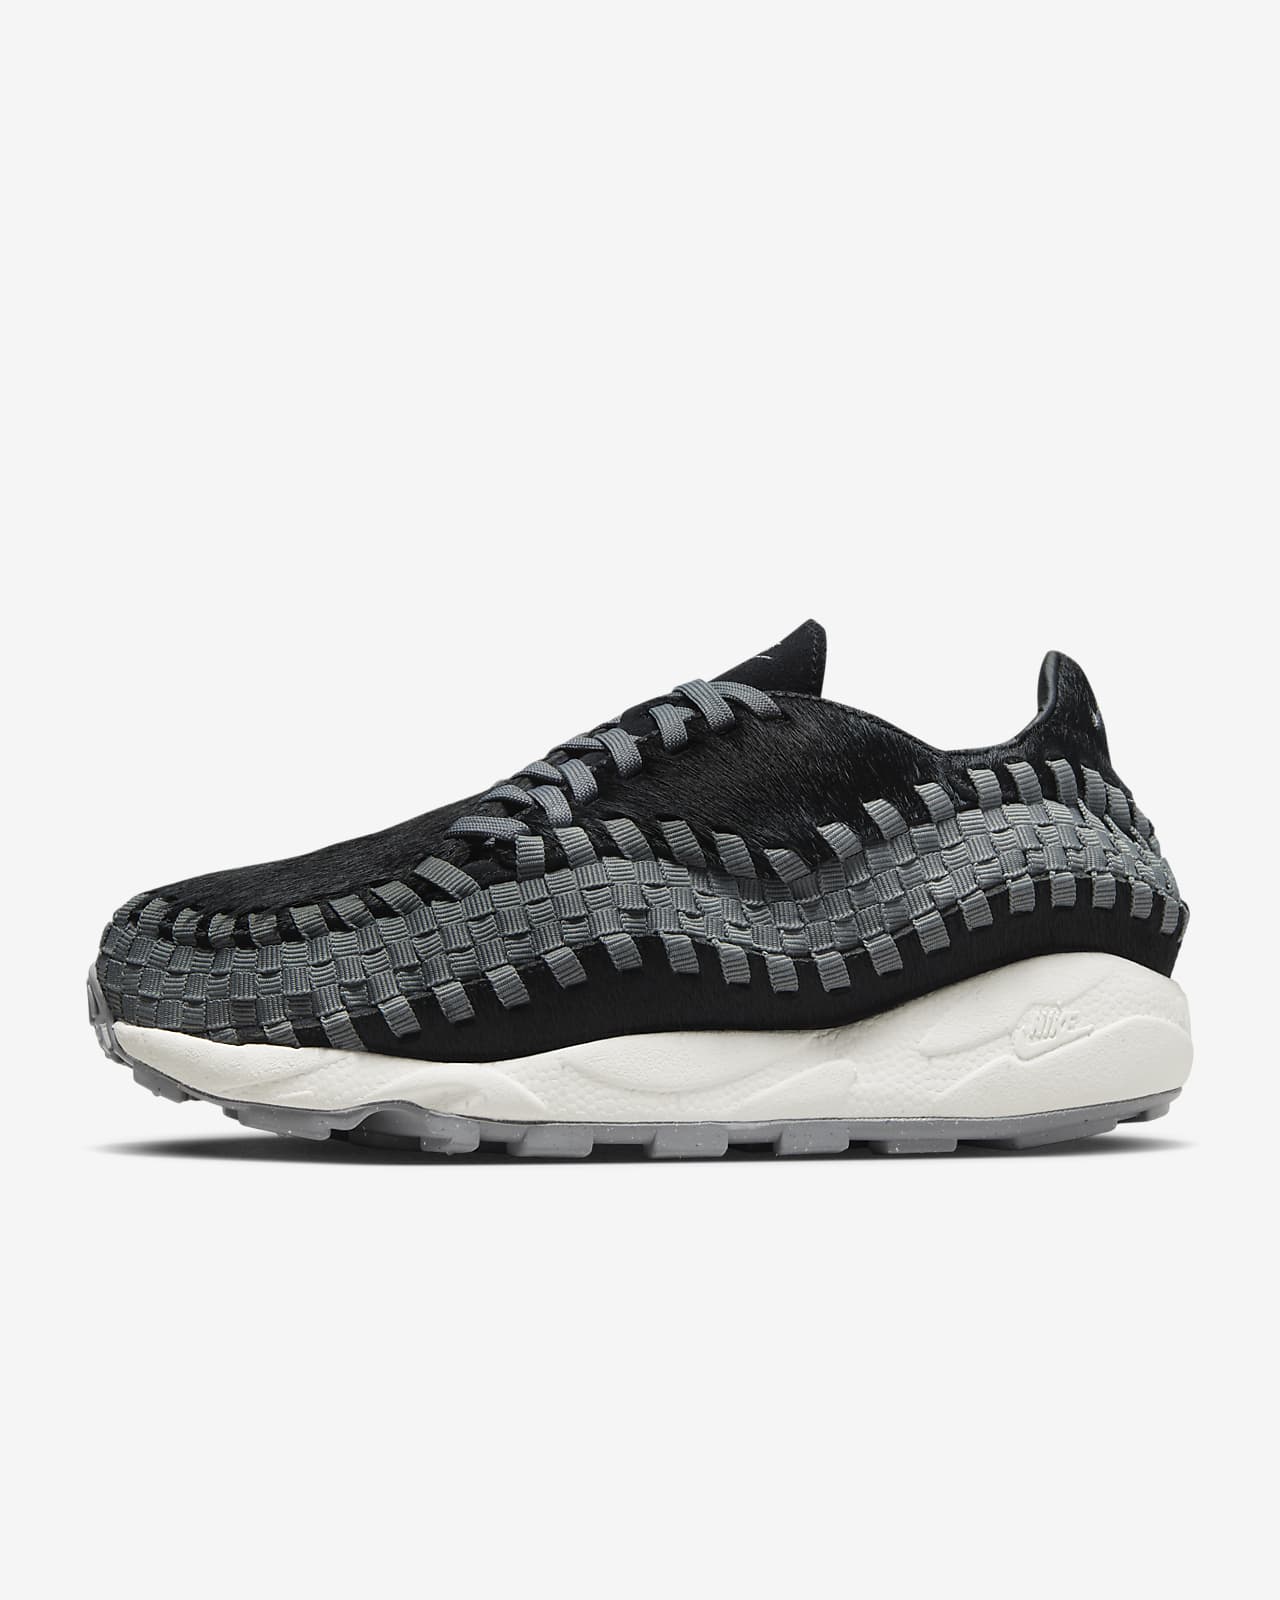 Nike Air Footscape Woven Women's Shoes